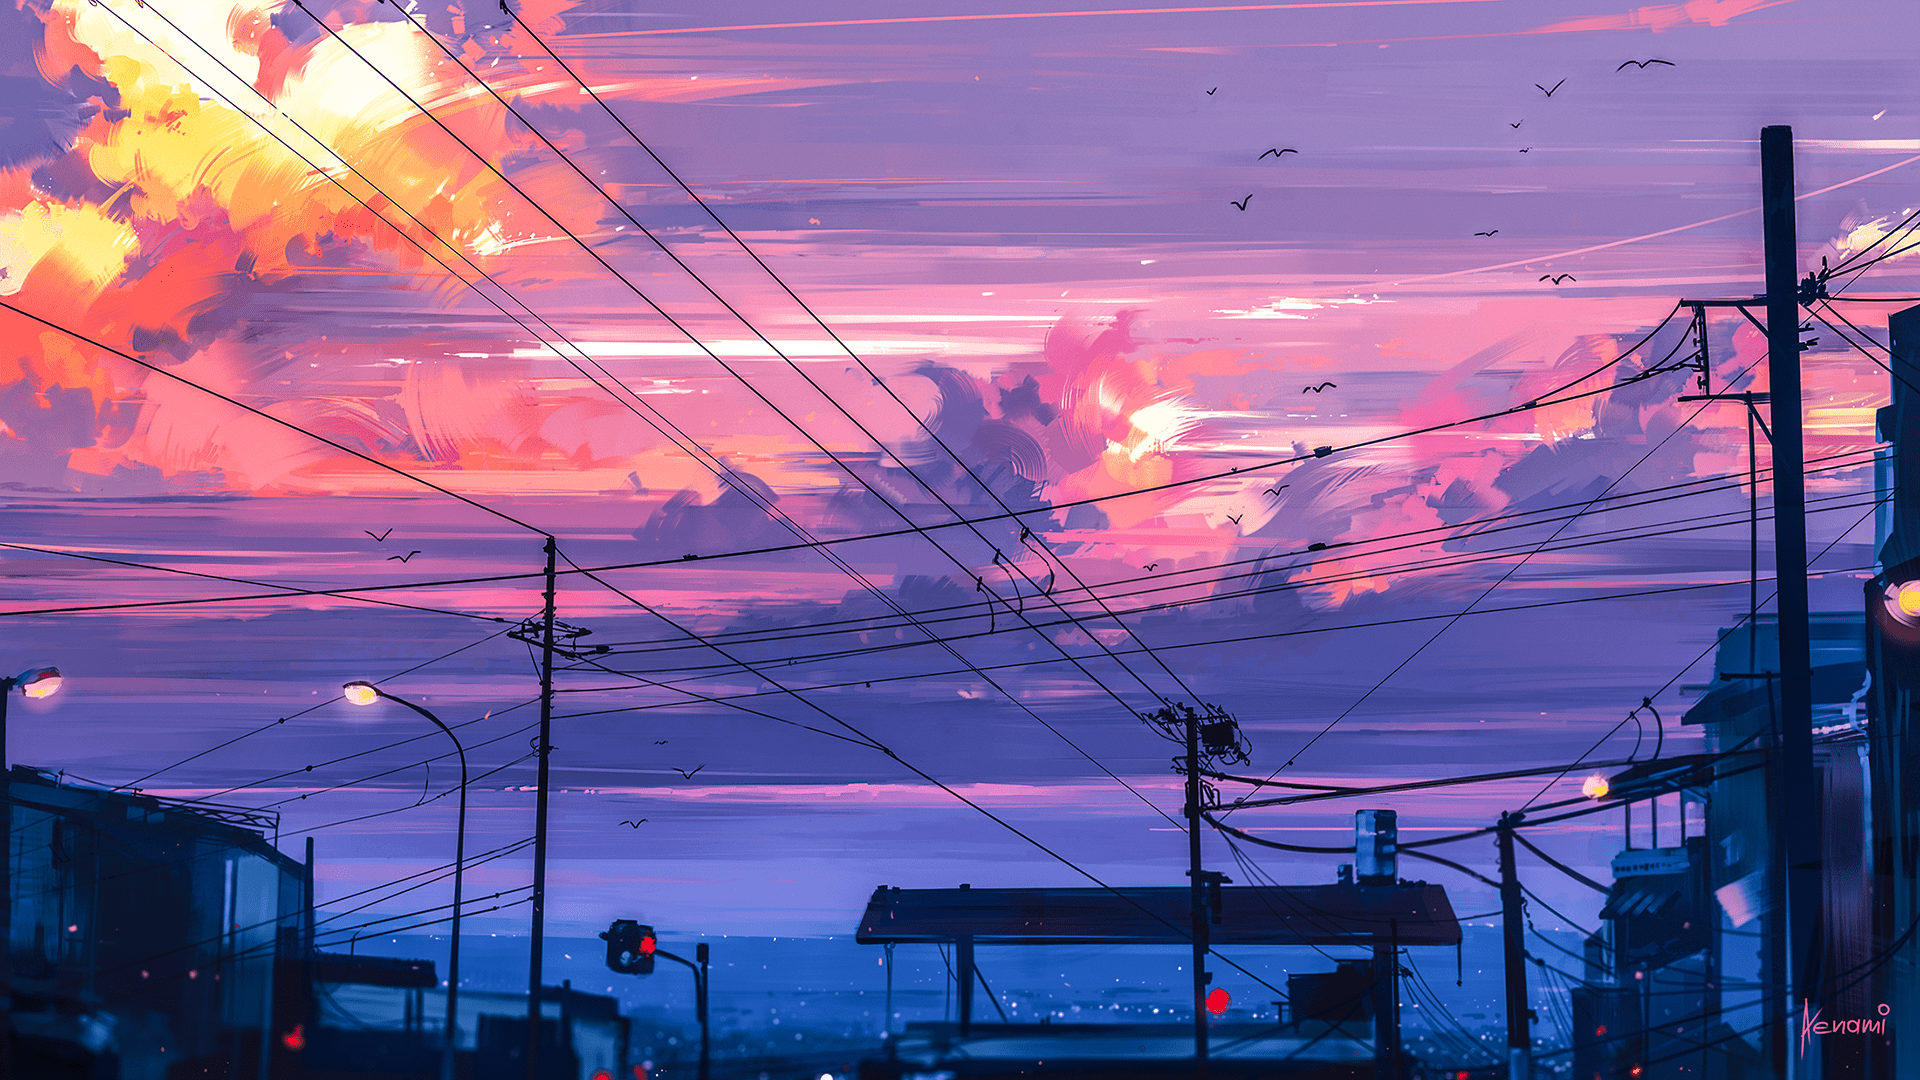 A city street with buildings and power lines - 1920x1080, desktop, anime, anime sunset, cool, anime city